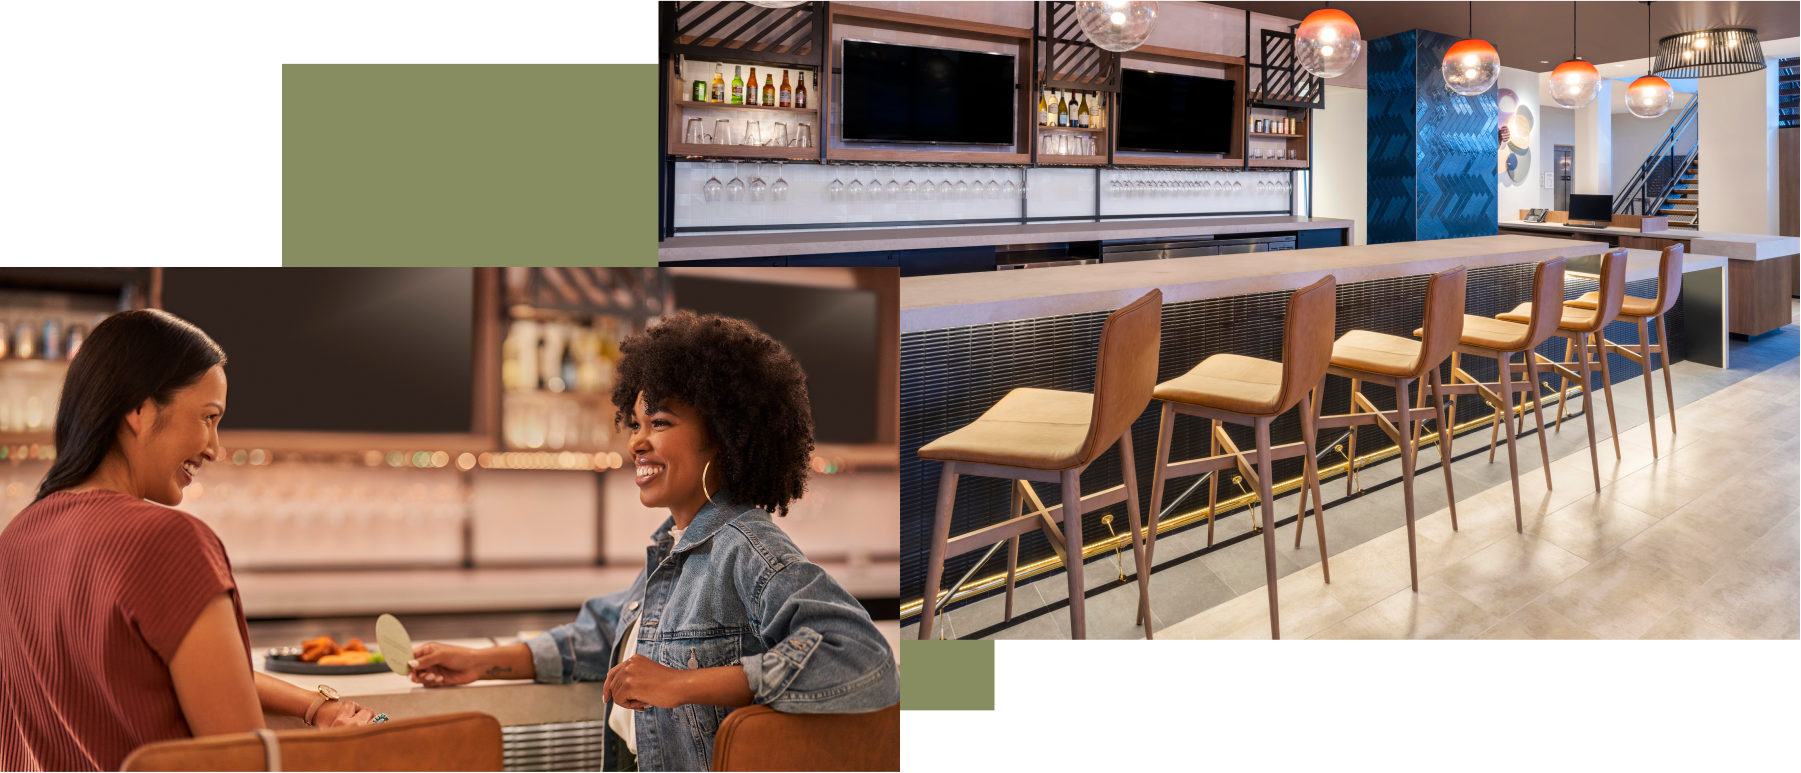 A mosaic of images showing the hotel dining counter as well as a group of travellers enjoying a drink together.